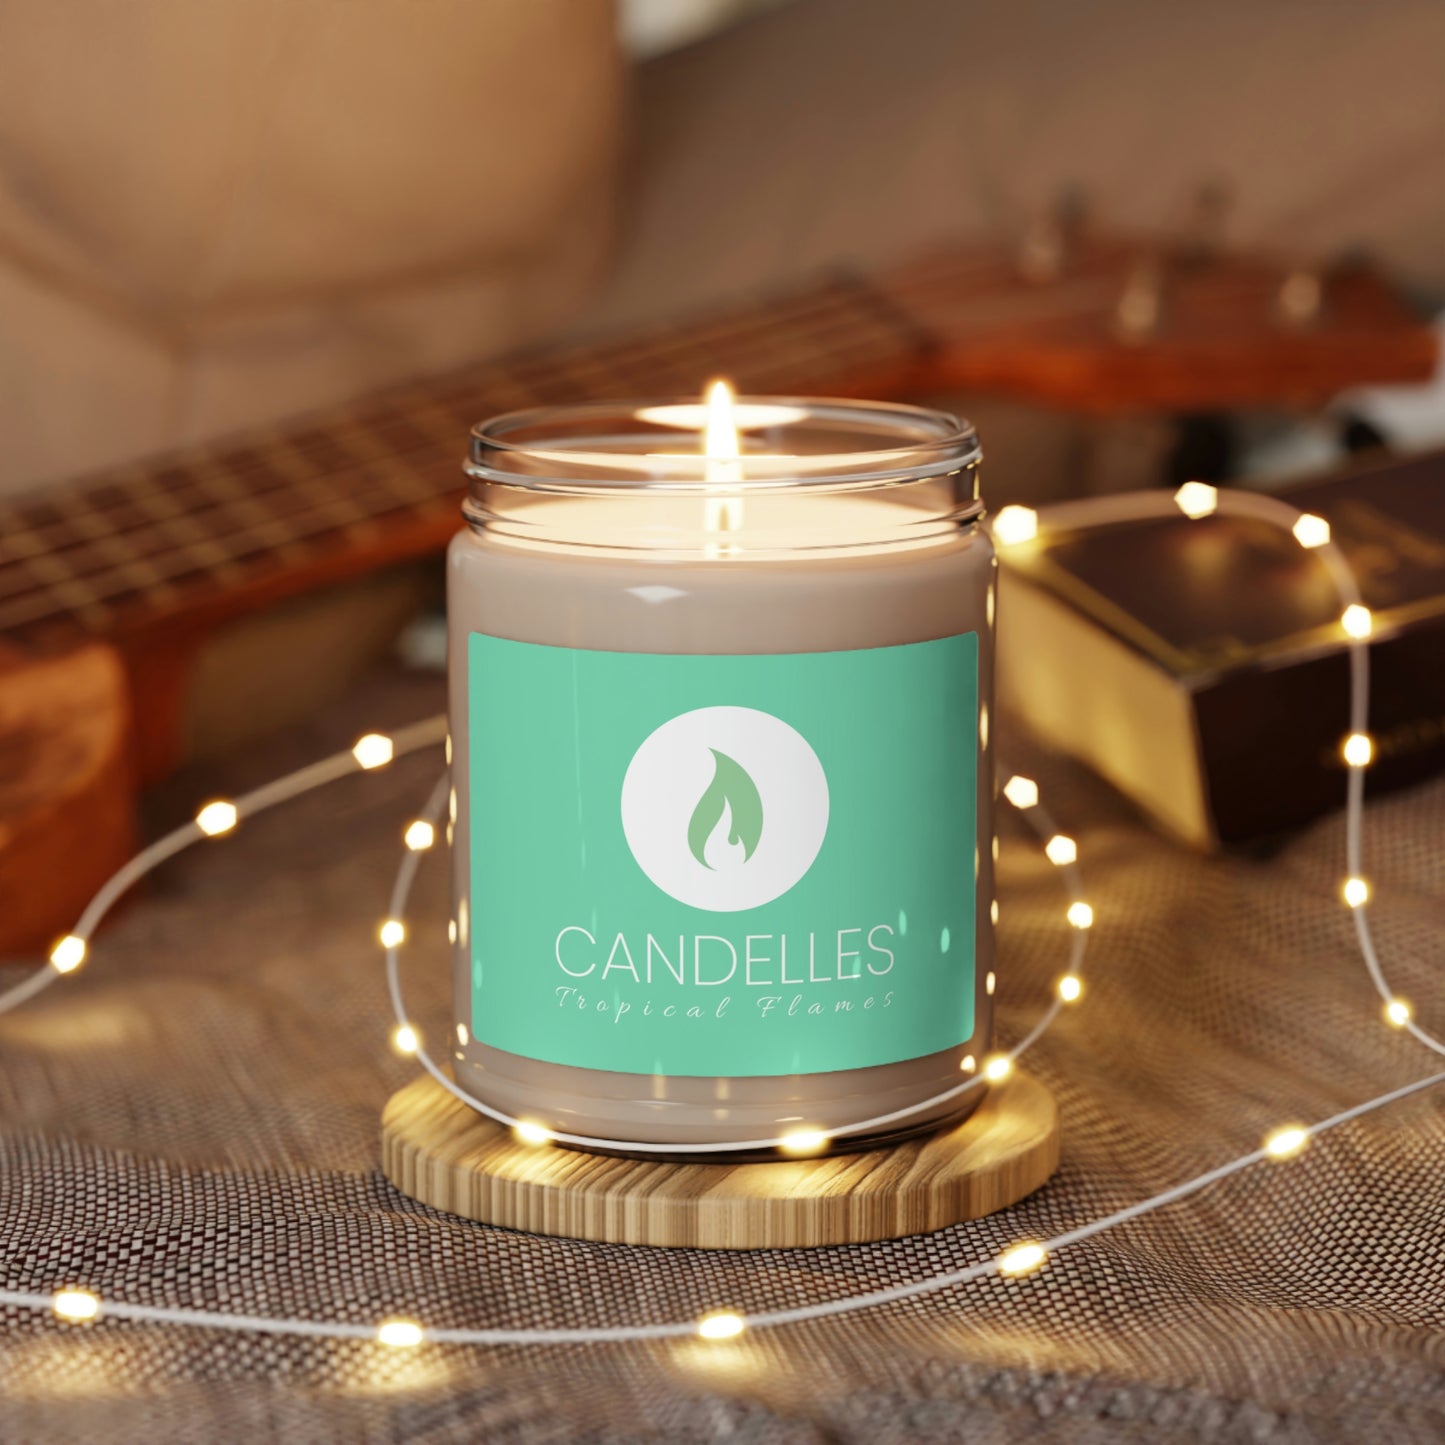 'Candelles Seaside Apples' - Scented Soy Candle, 9oz